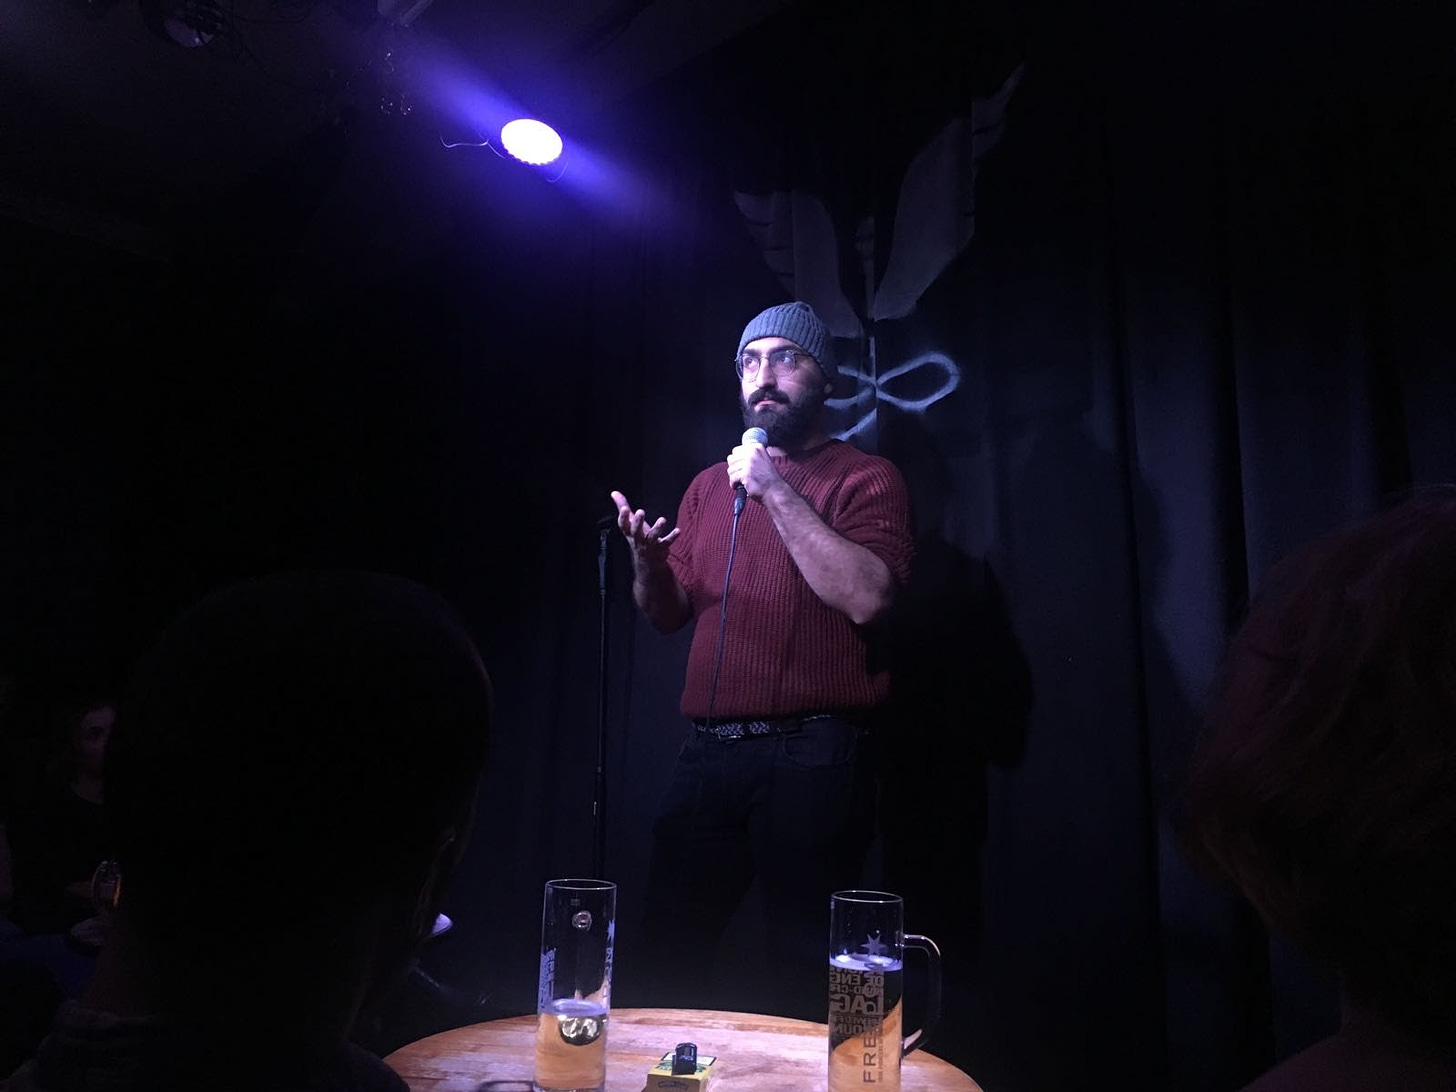 Amir on stage in an orange jumper and grey hat holding a mic in front of the Angel Comedy logo. Two half finished pints from the audience are visible on a table in front of the stage.